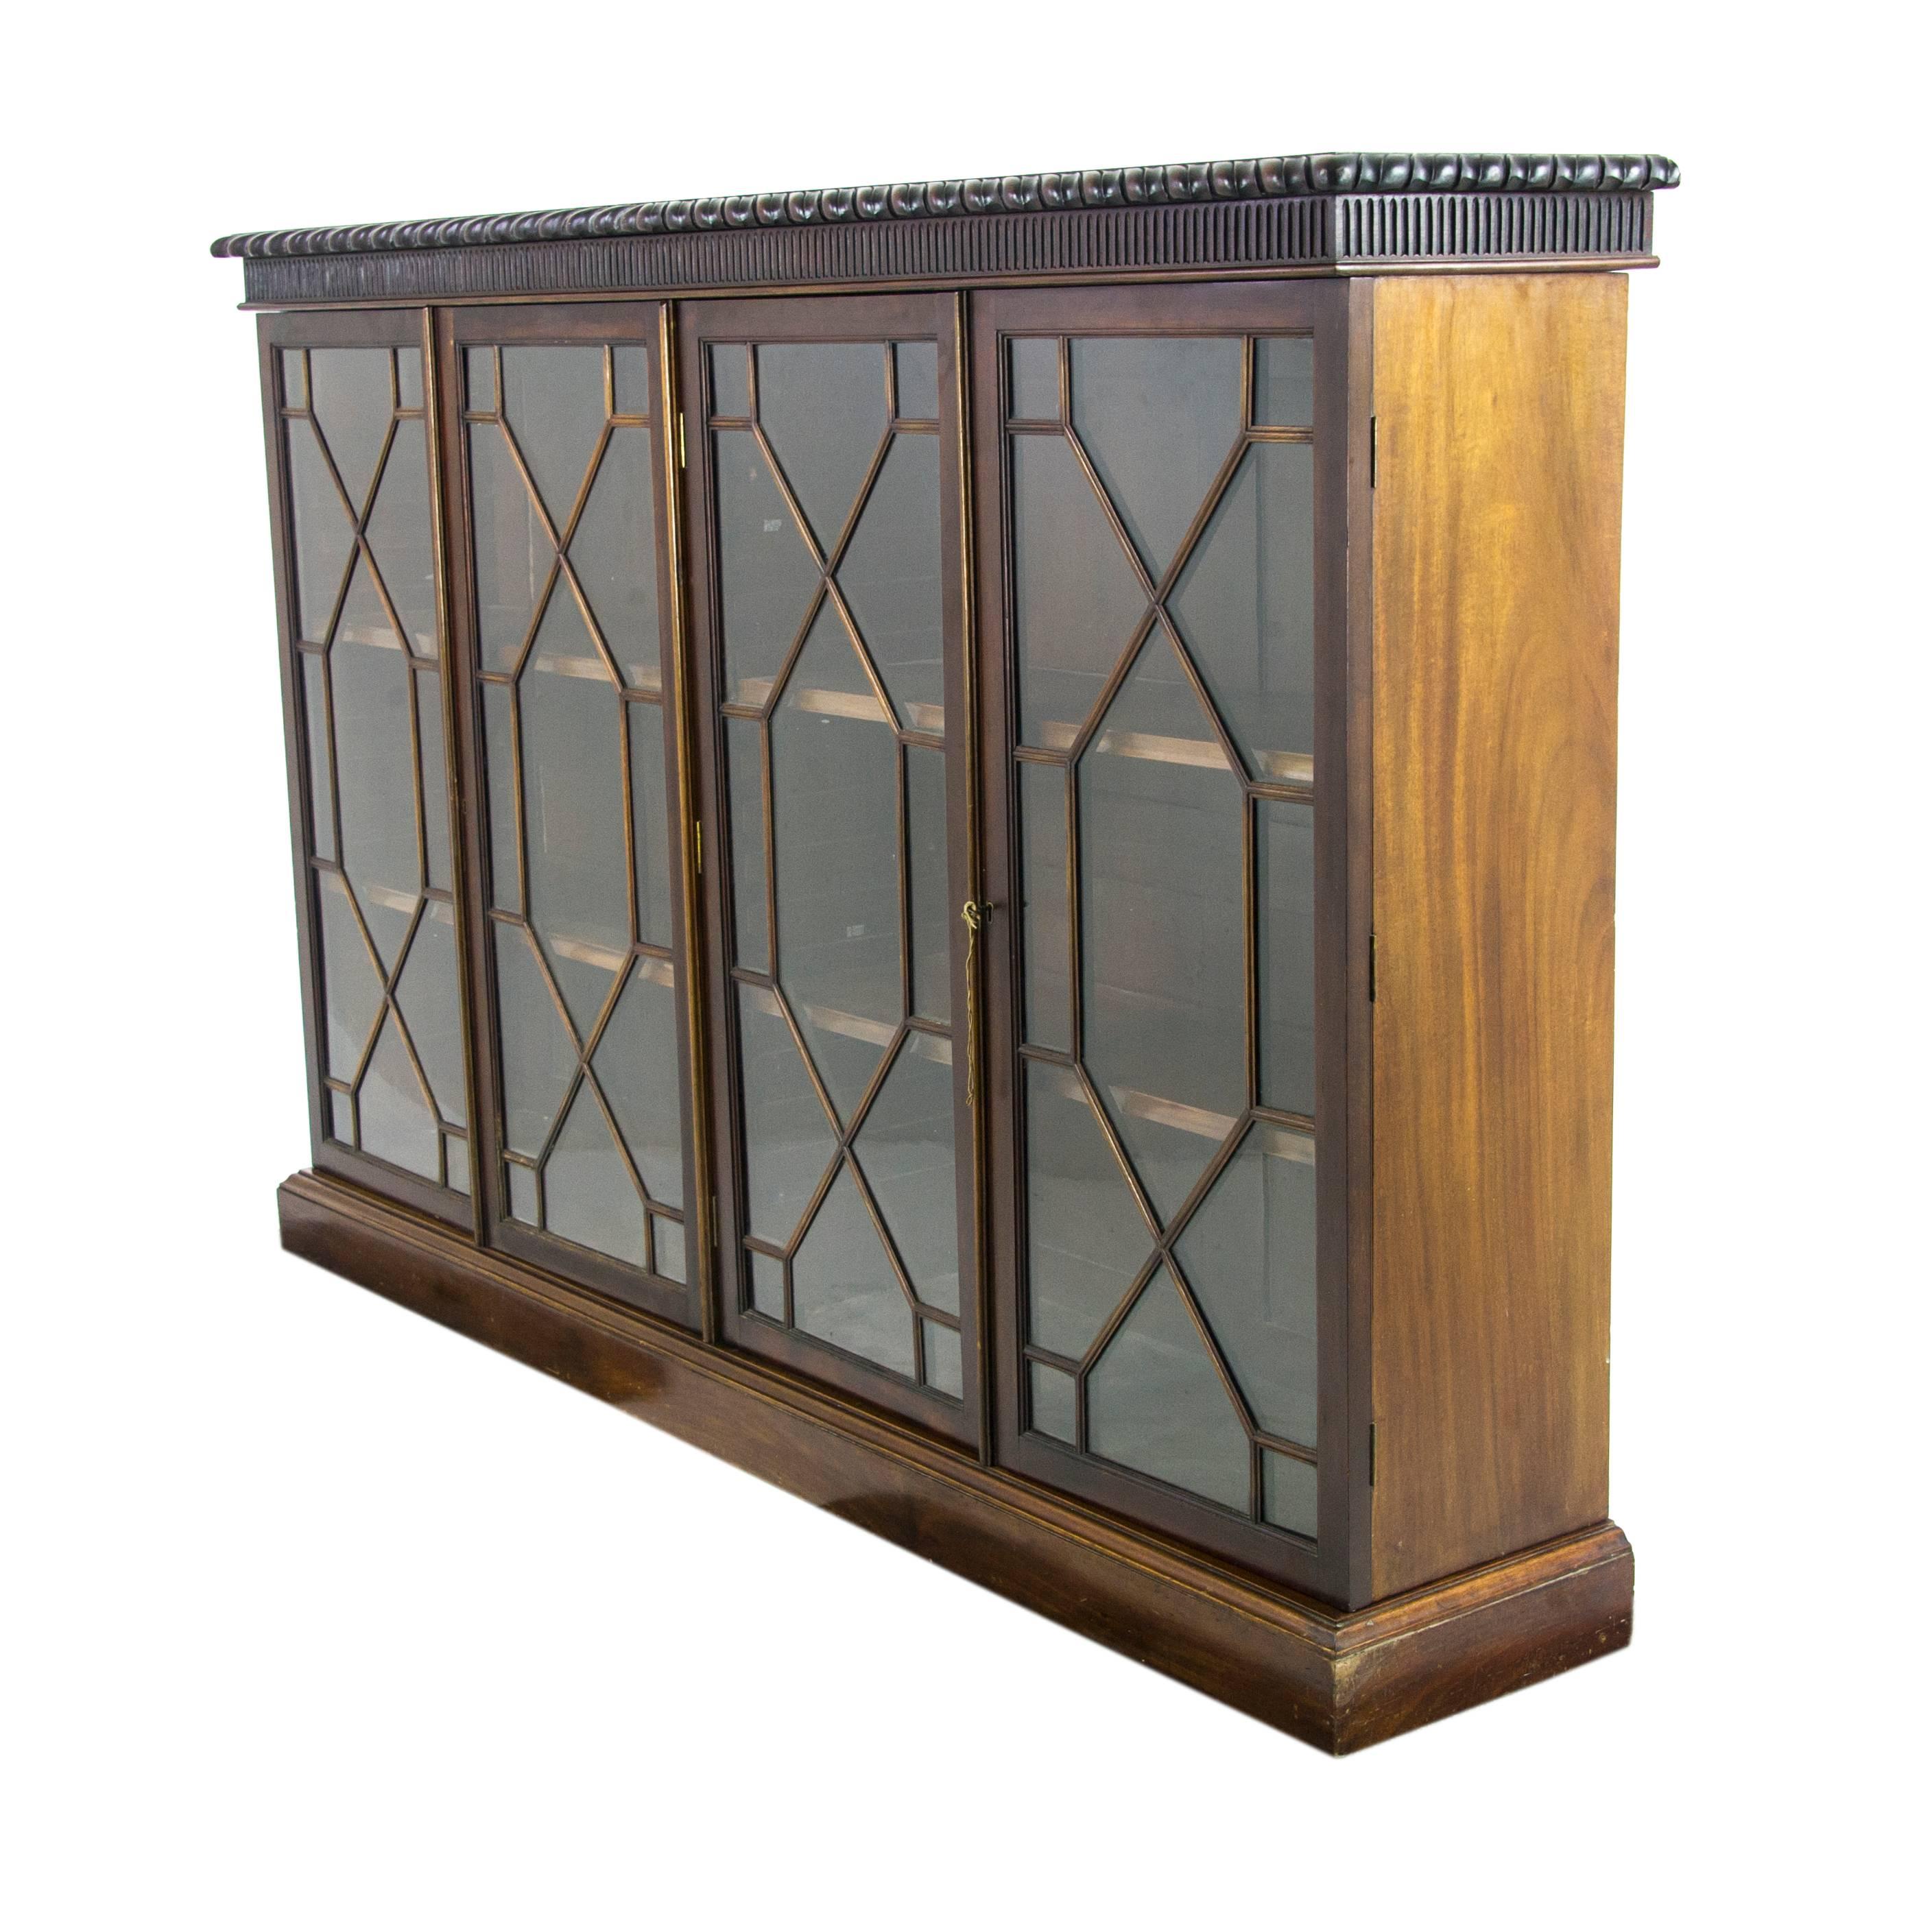 Walnut bookcase, antique bookcase, Scotland 1910, Antique Furniture, B1000.

Scotland, 1910.
Solid mahogany
Original finish
Rectangular top with gadroon
Carved at edge
Four astragal doors with working lock and key
Each door encloses fully adjustable